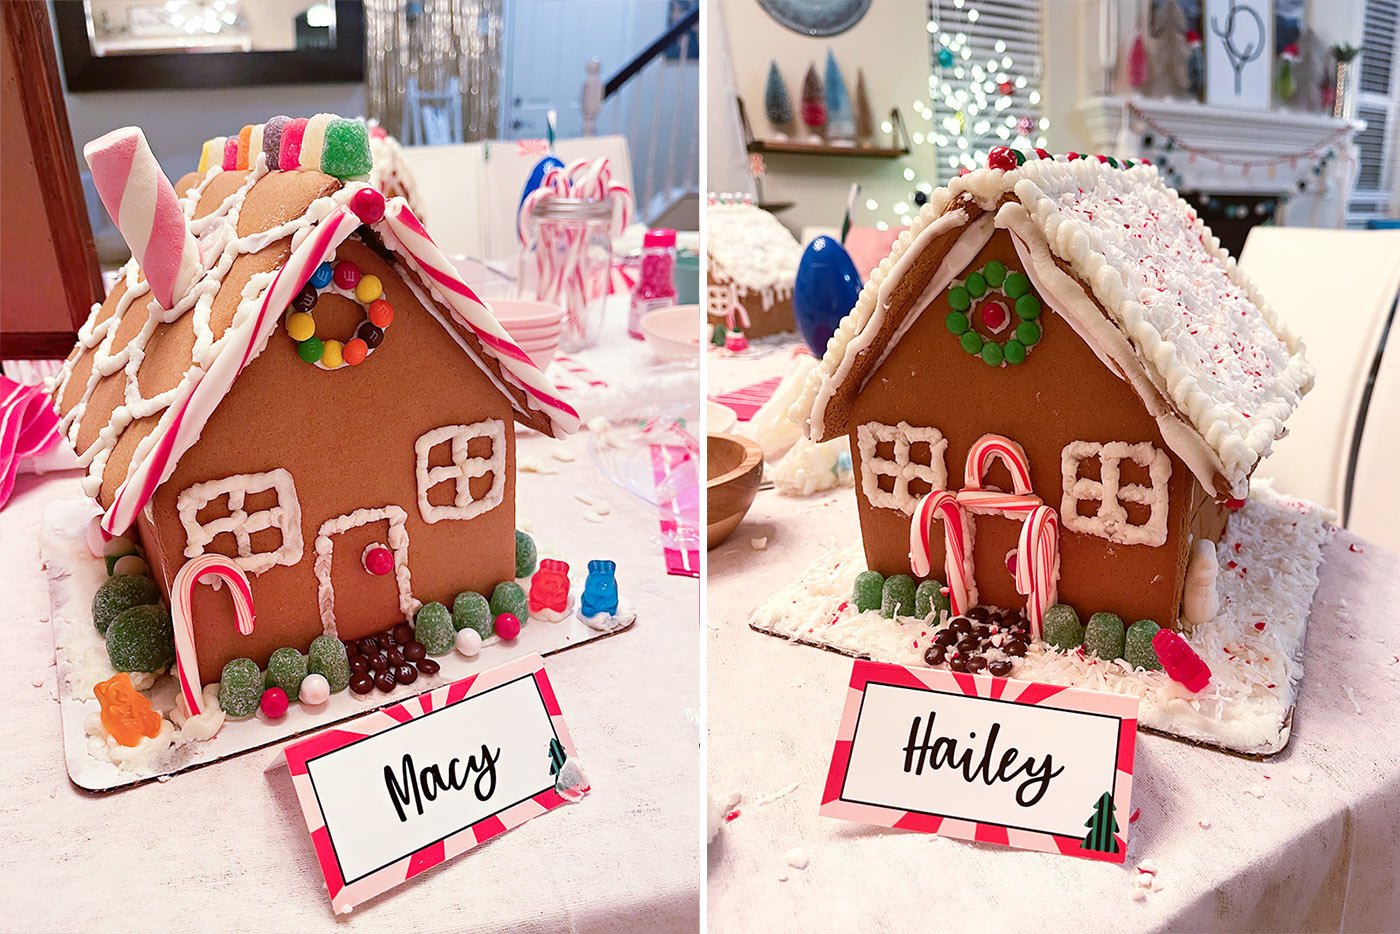 kids decorated gingerbread houses with name tags